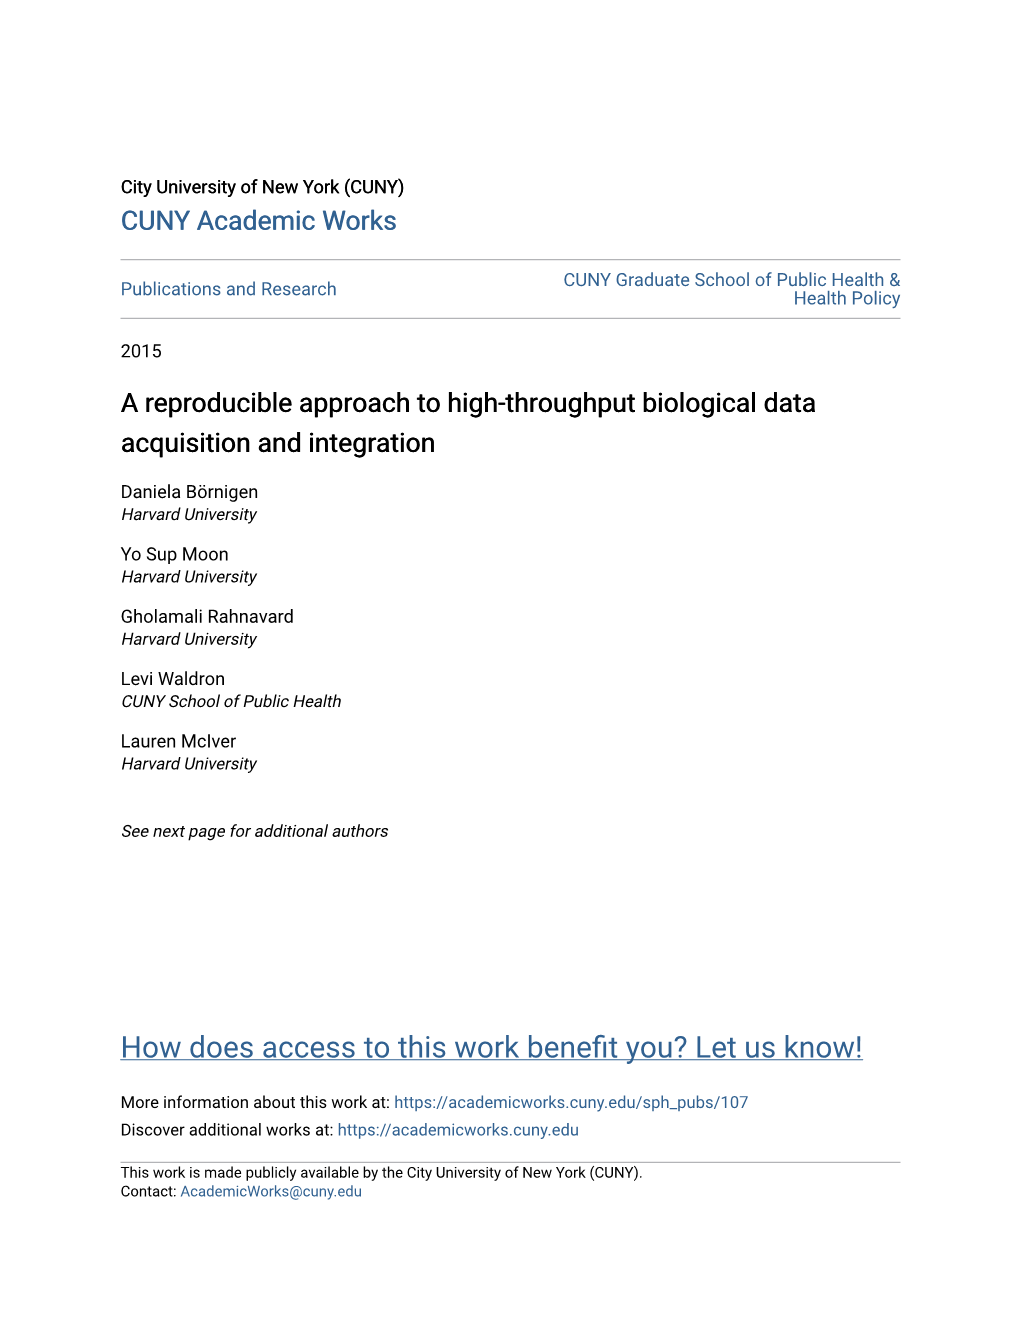 A Reproducible Approach to High-Throughput Biological Data Acquisition and Integration